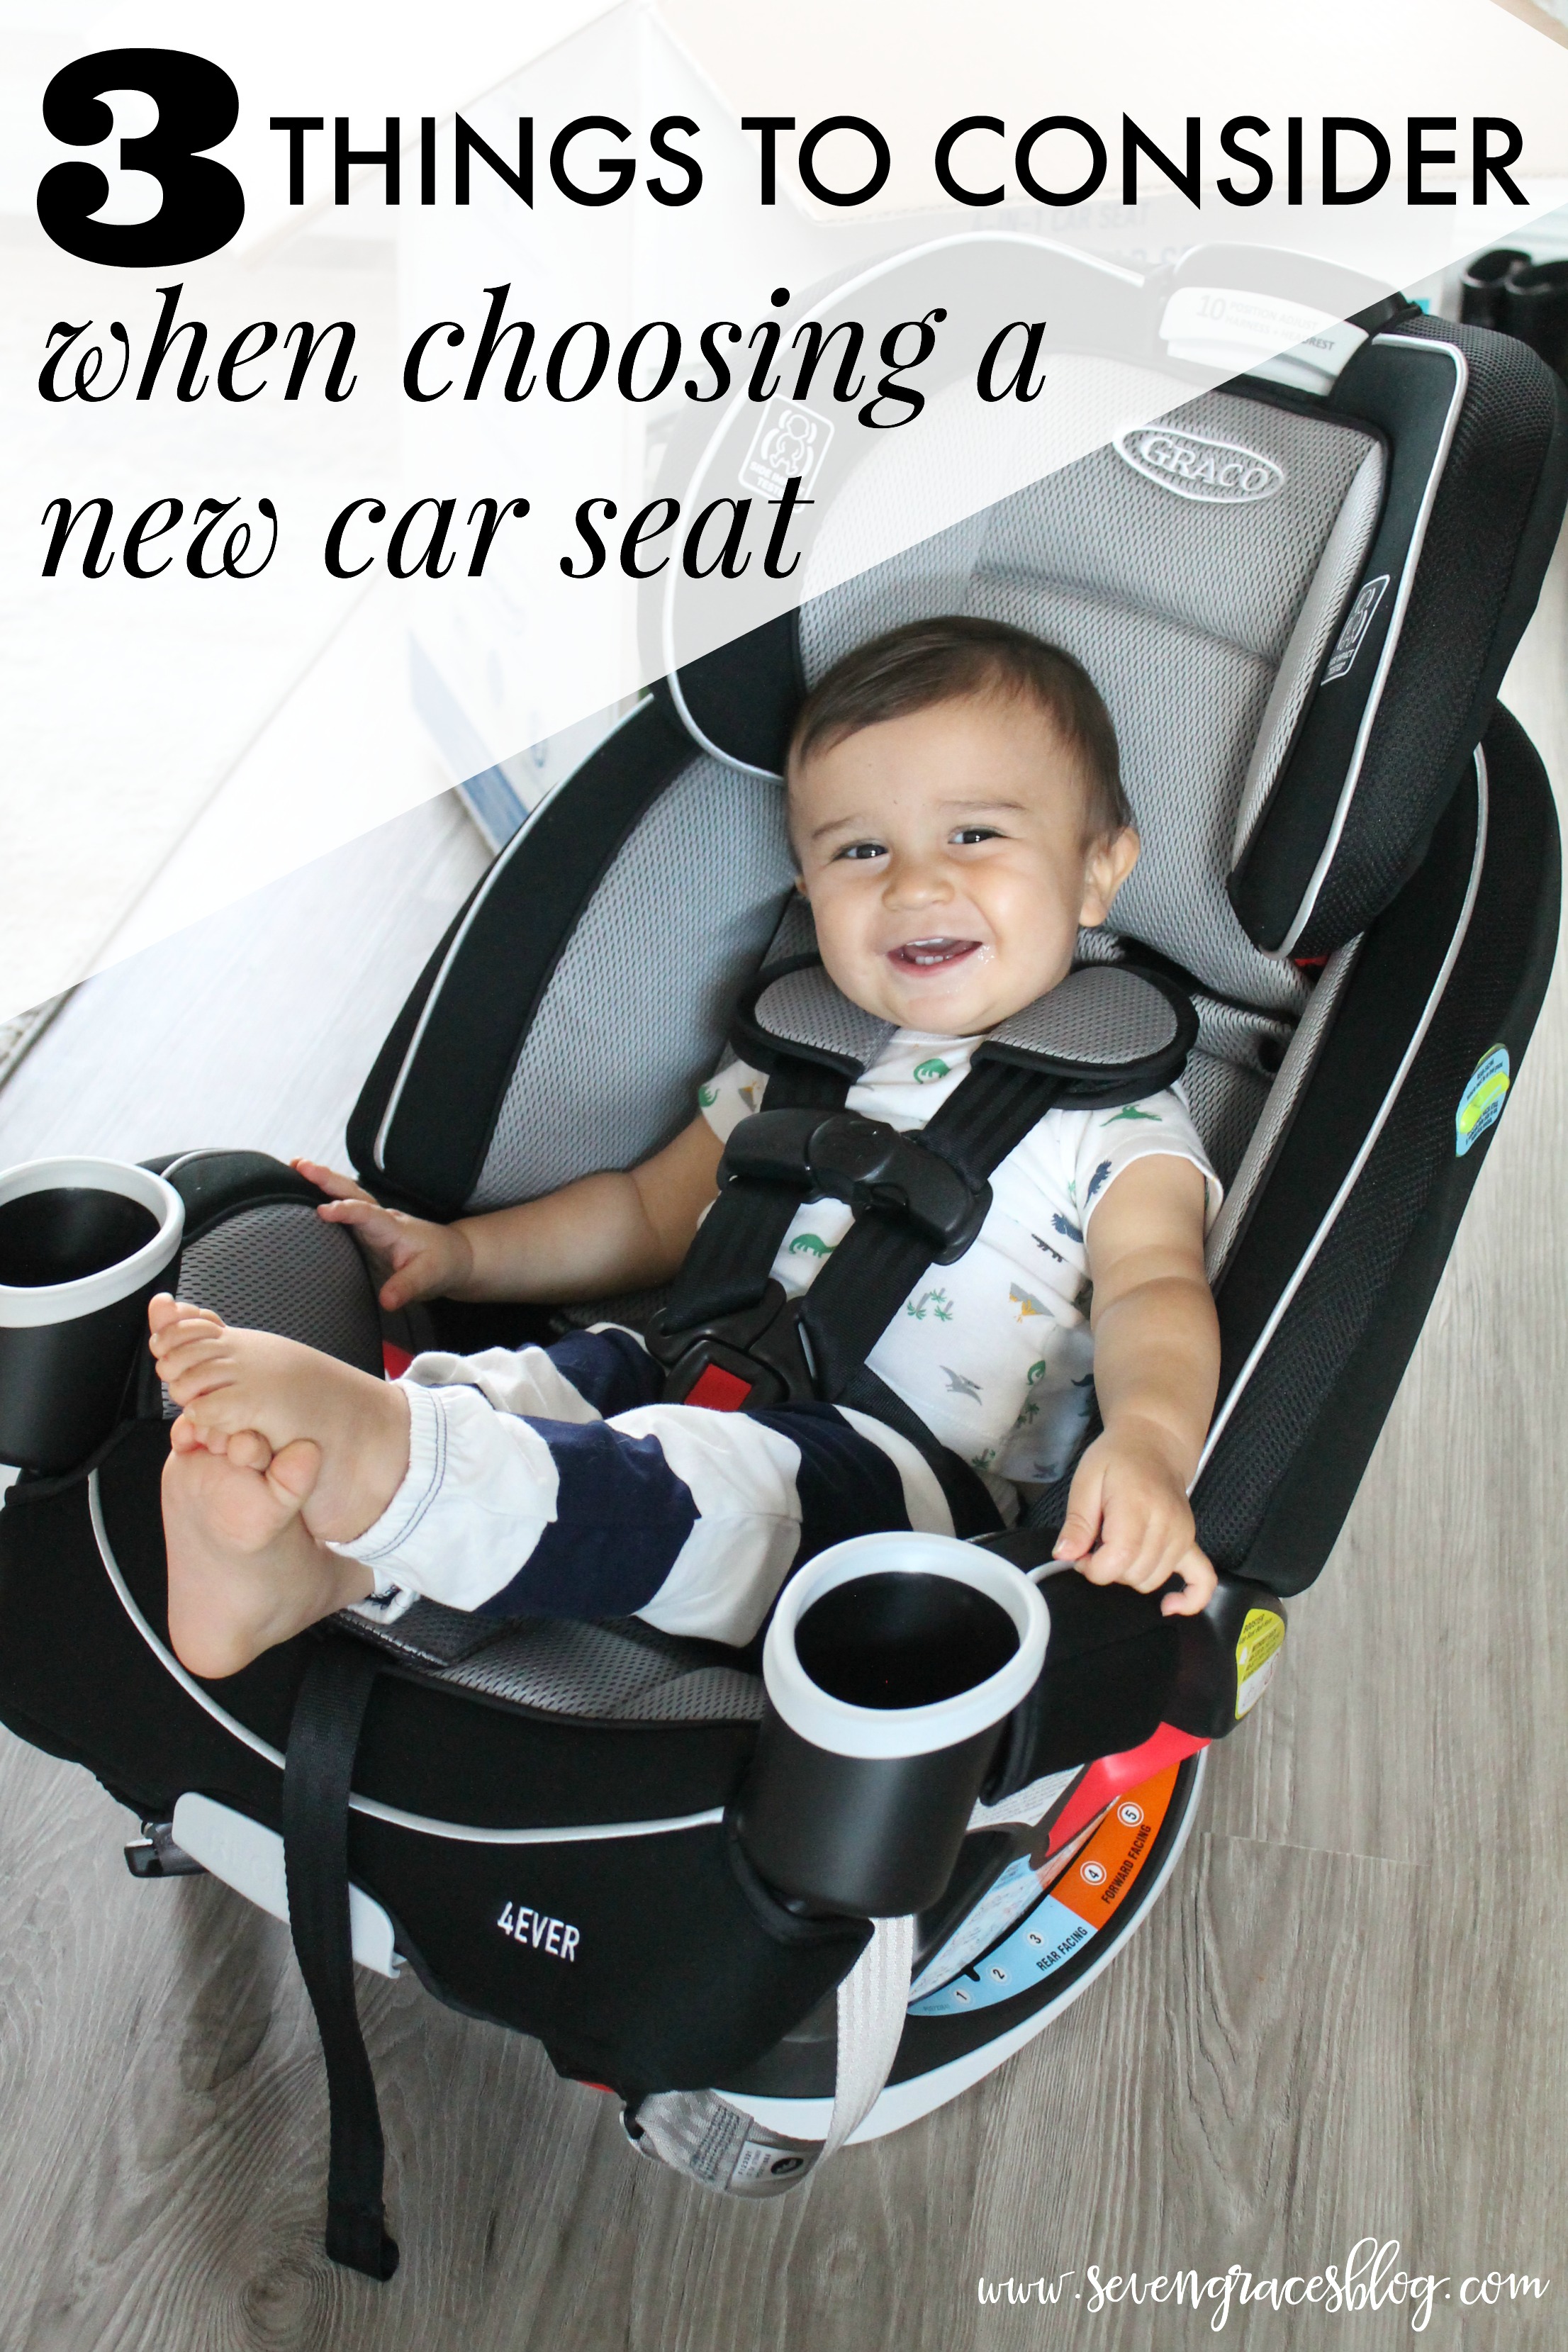 What to look for when choosing a new car seat & three big reasons why we went with the Graco 4Ever All-in-1: quality, safety, & affordability. Sponsored by Graco. #carseat #babyitems #bestbabyproducts 